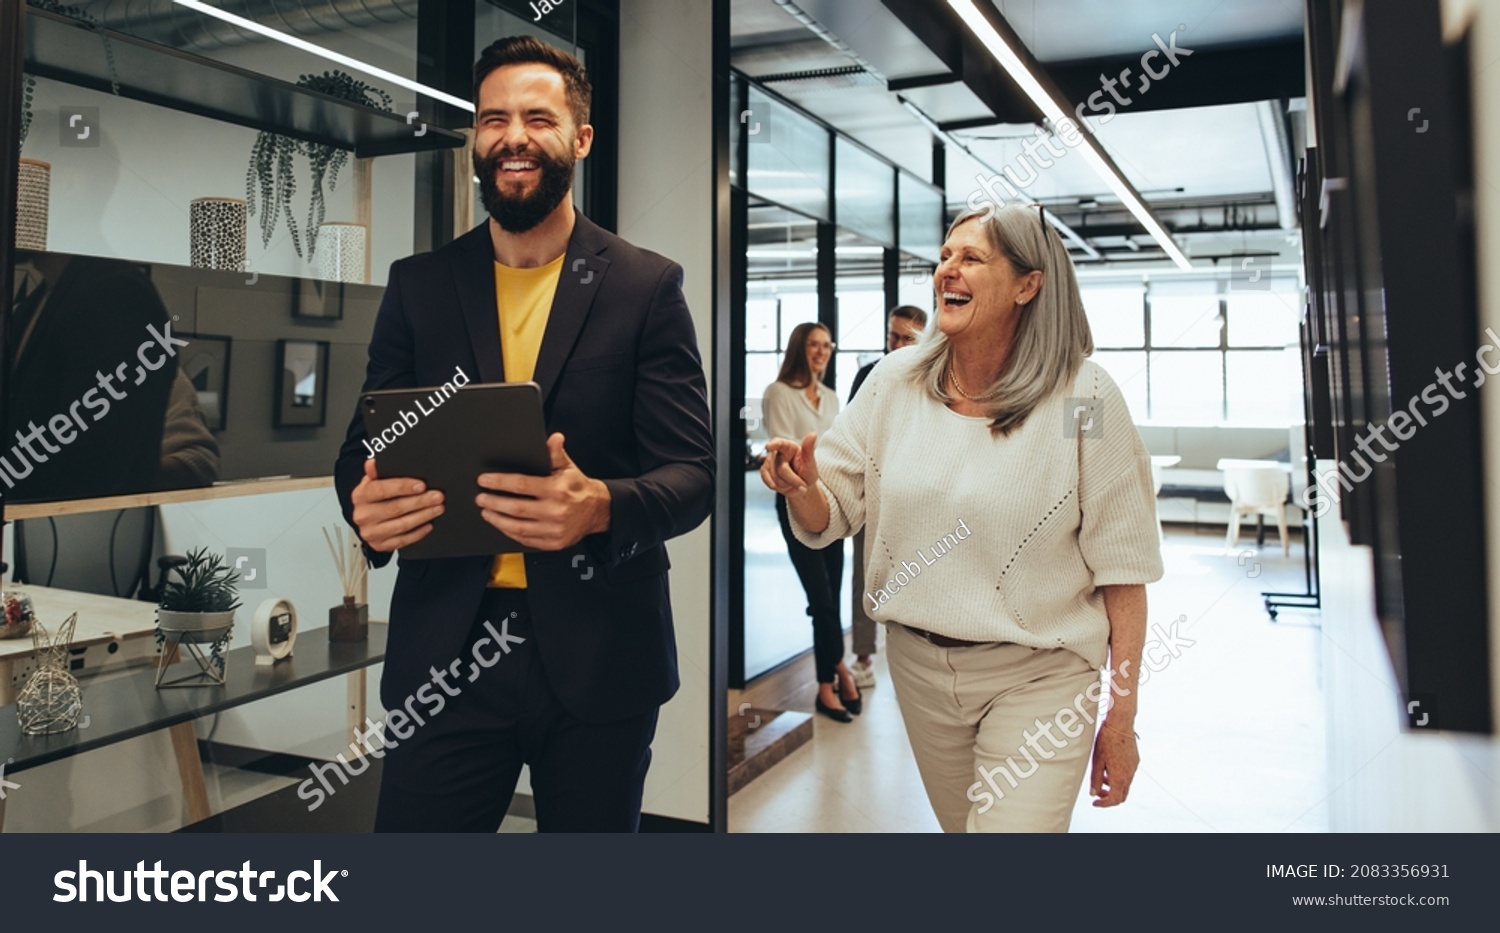 Laughing entrepreneurs walking together in an office. Two happy business colleagues sharing a laugh while having a discussion. Diverse businesspeople working together on a project. #2083356931